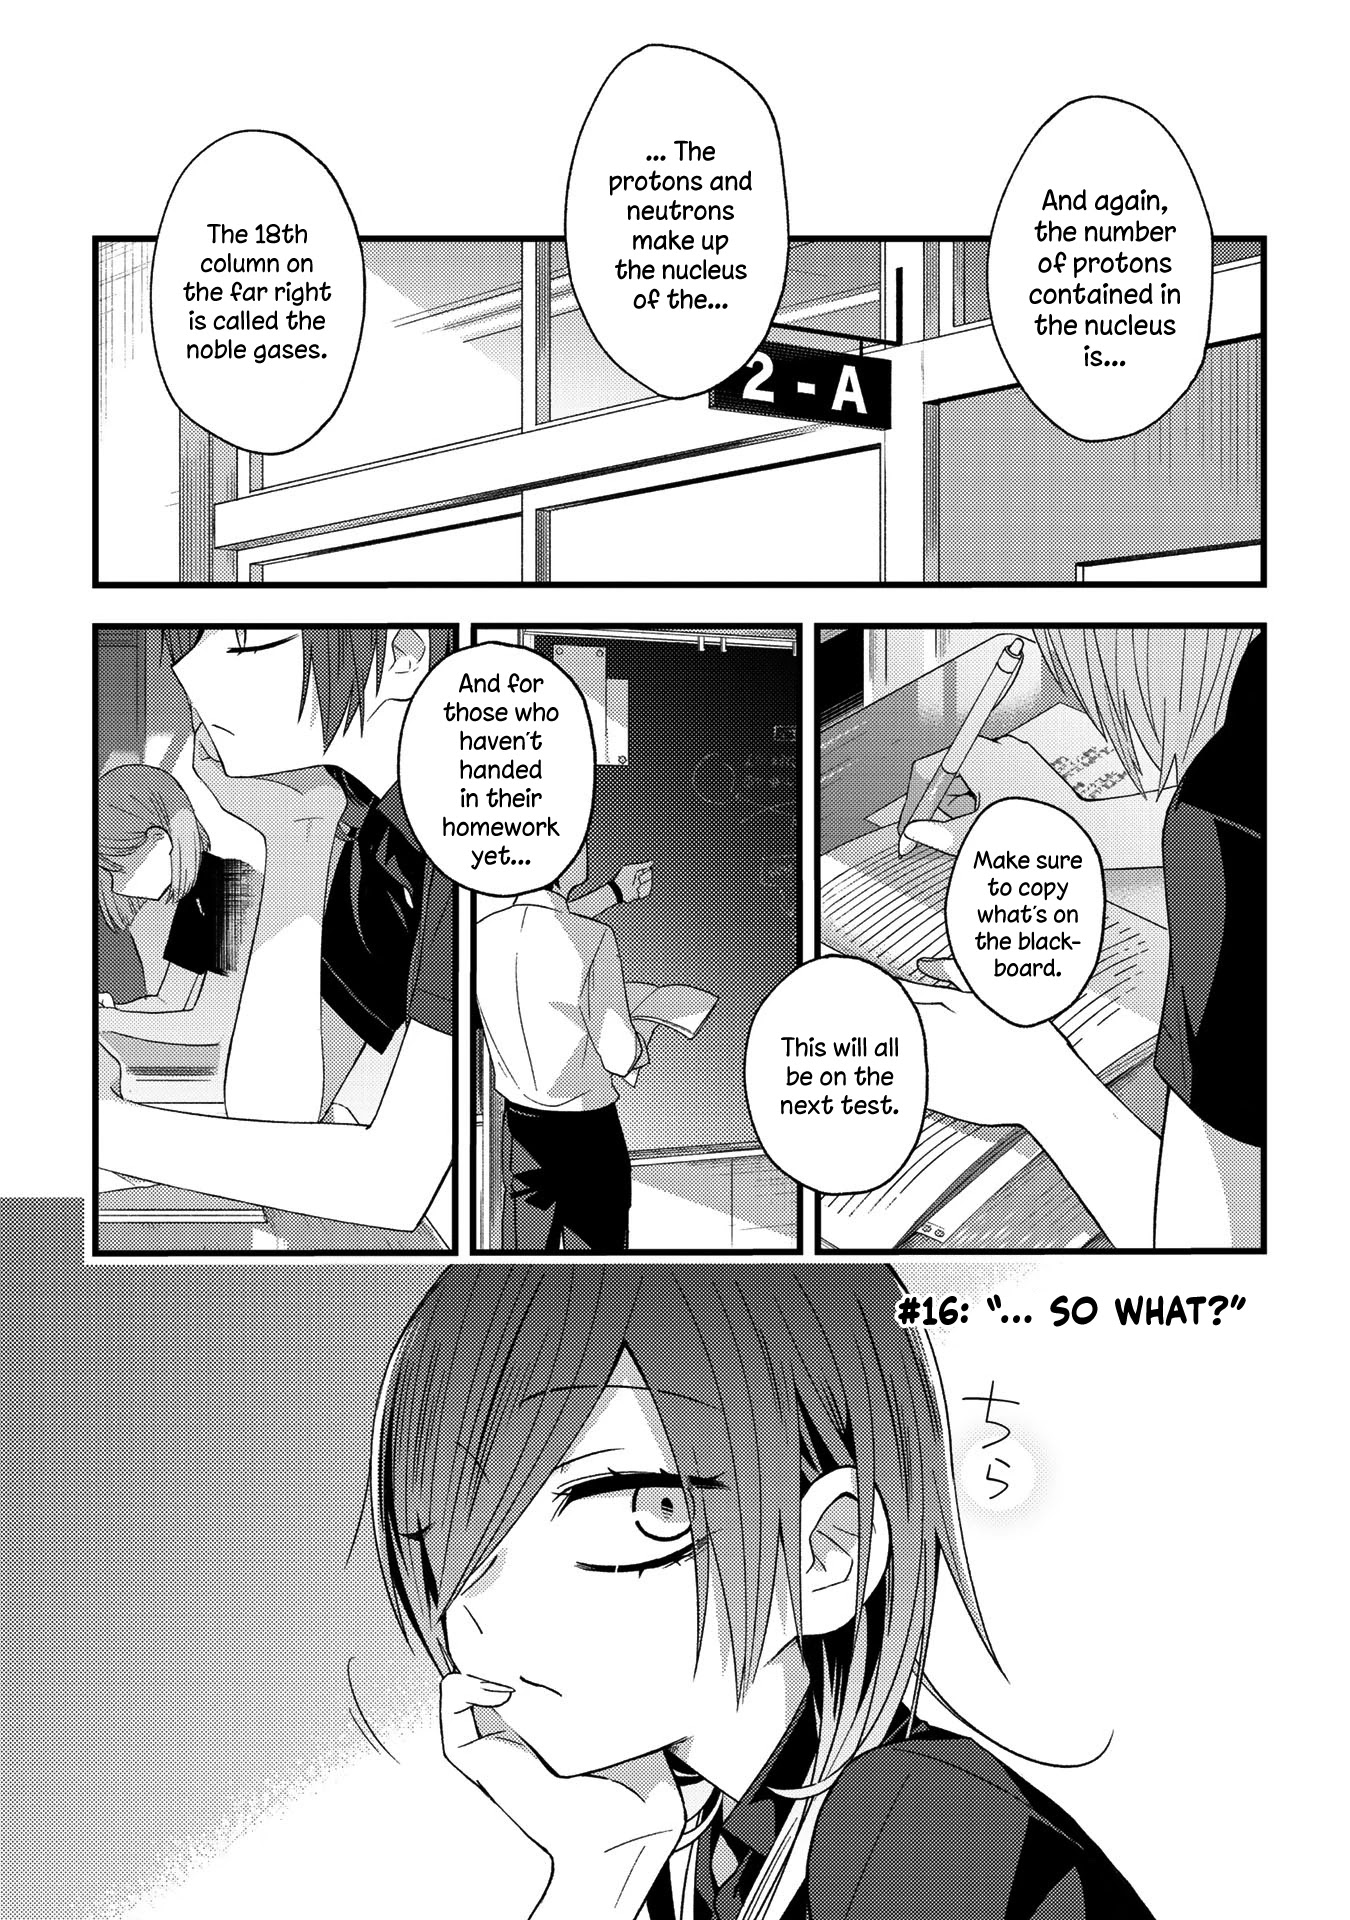 School Zone (Ningiyau) Chapter 16: ... So What? - Picture 1